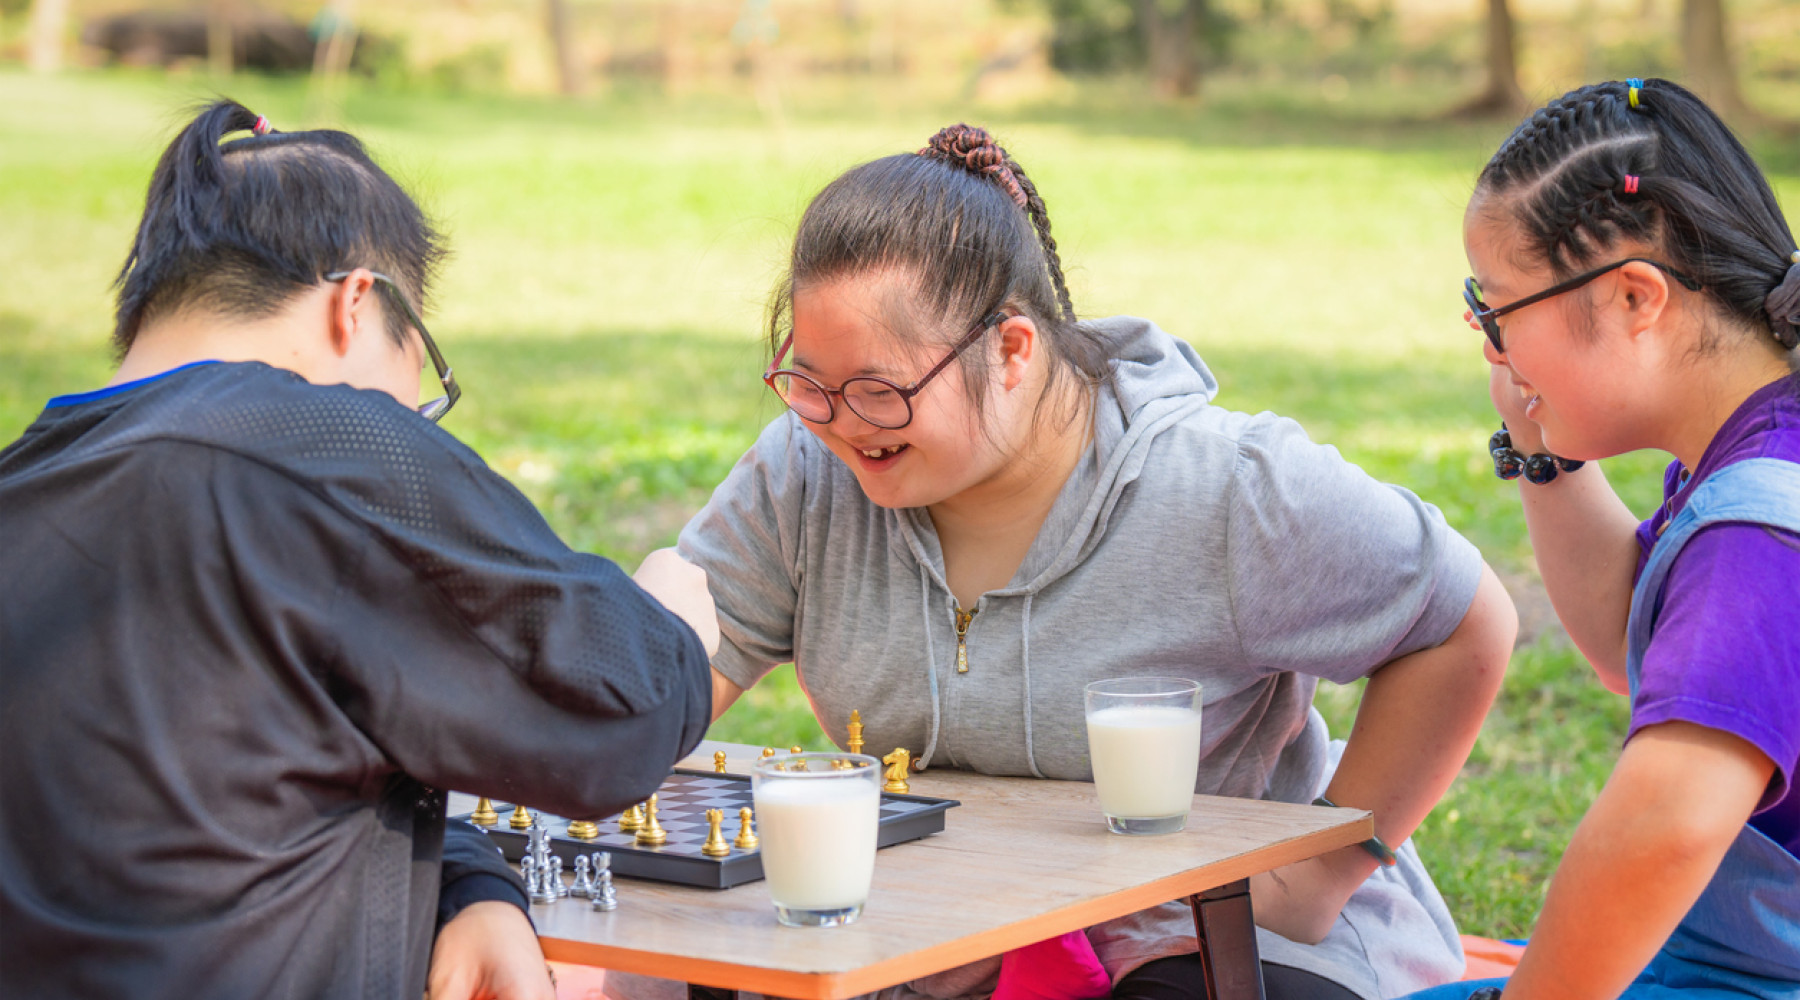 Three individuals enjoying a game of chess outdoors, with a focus on a smiling woman with Down syndrome, highlighting the significance of Mental Health and Disability.